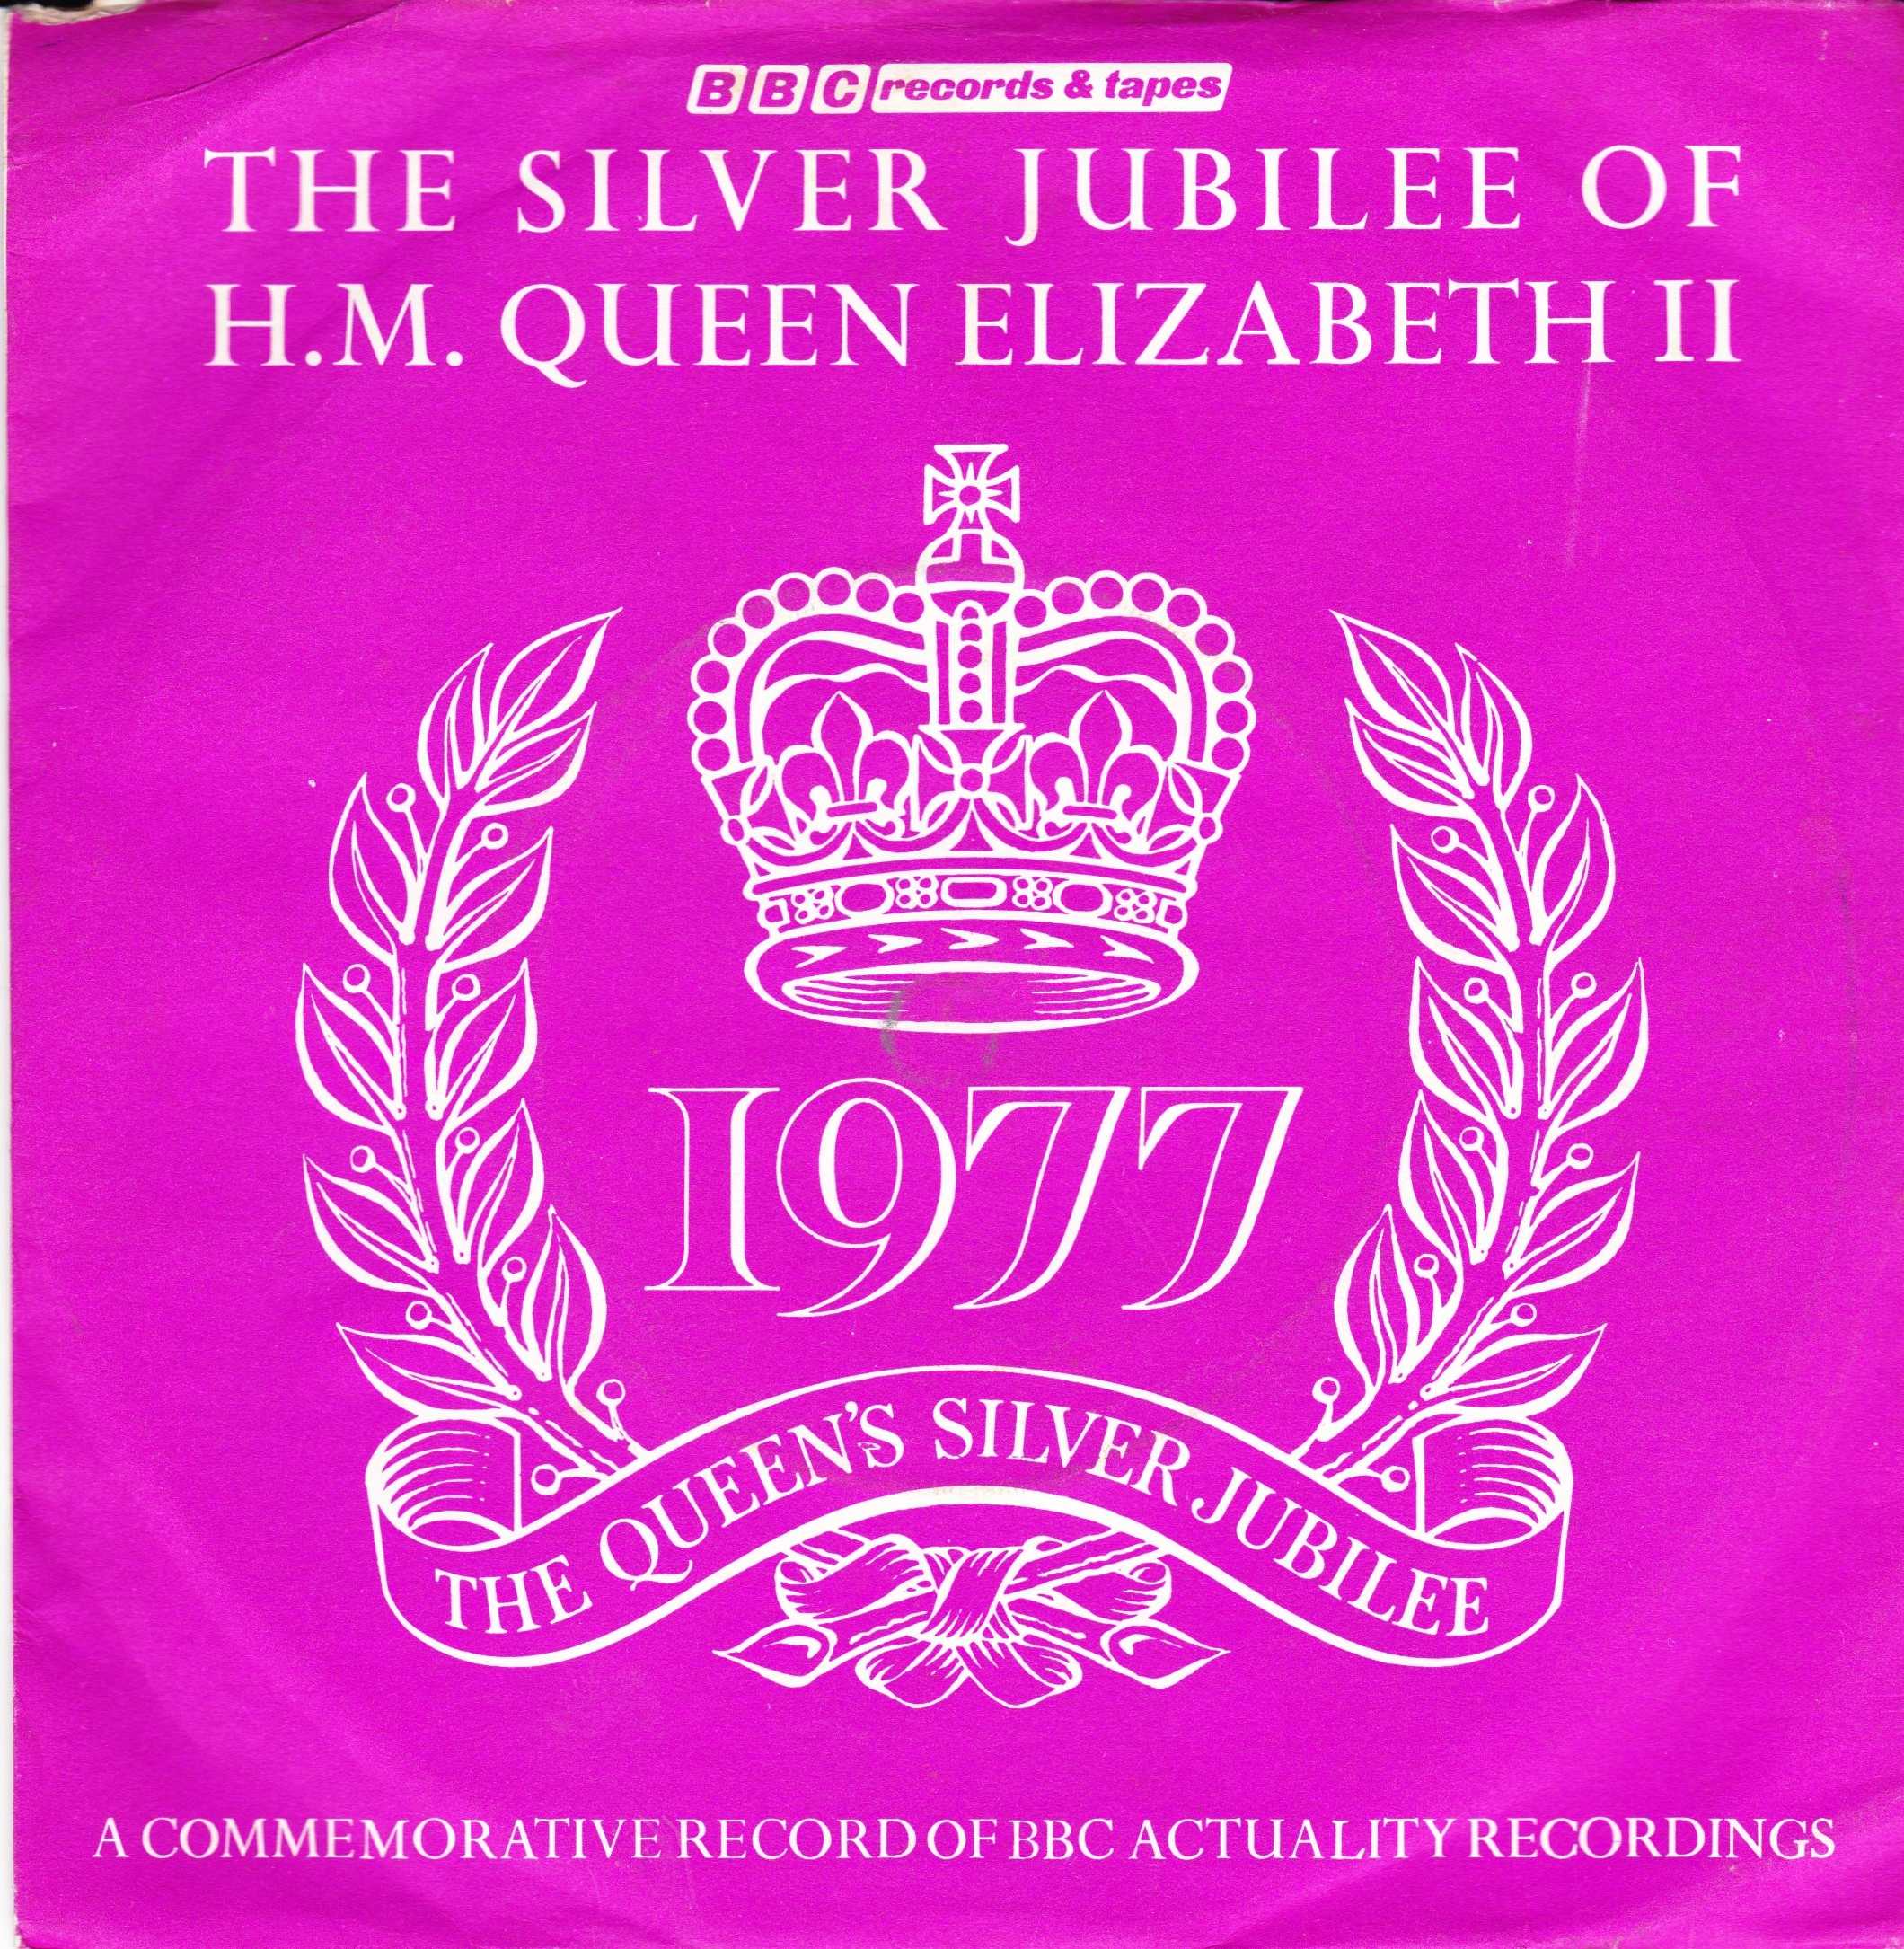 Picture of RESL 49 Silver Jubilee of H. M. Queen Elizabeth II by artist Various from the BBC records and Tapes library